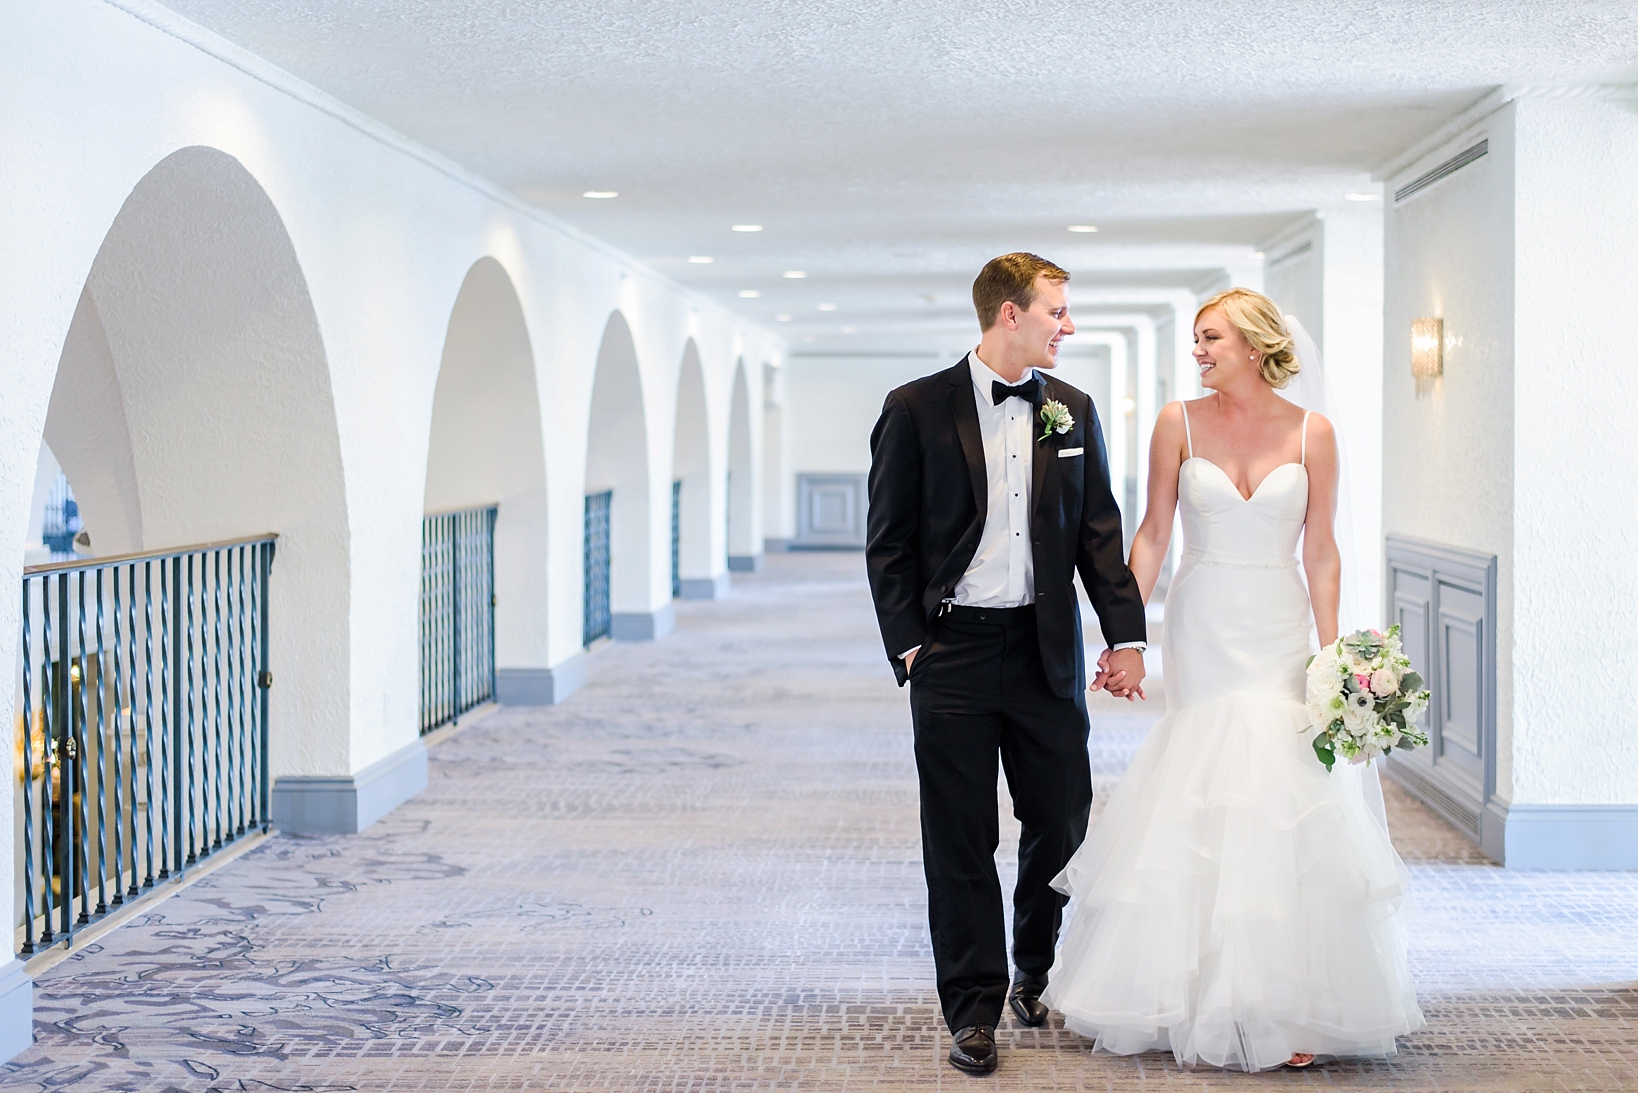 Bride and groom holding hands as they walk down the hallways of a hotel.